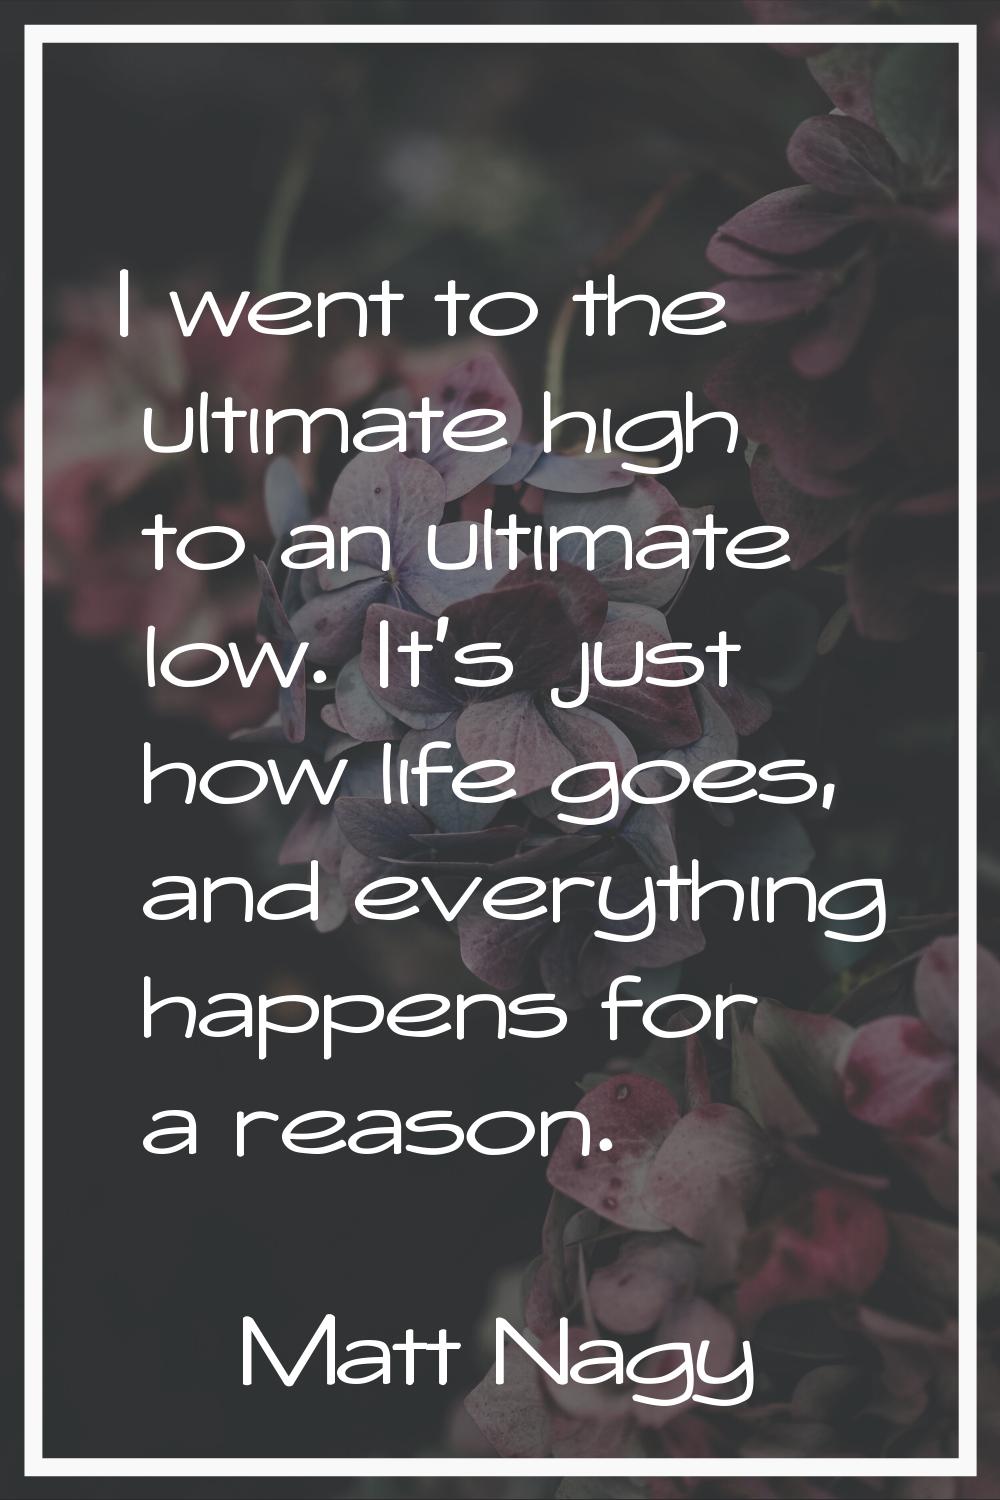 I went to the ultimate high to an ultimate low. It's just how life goes, and everything happens for